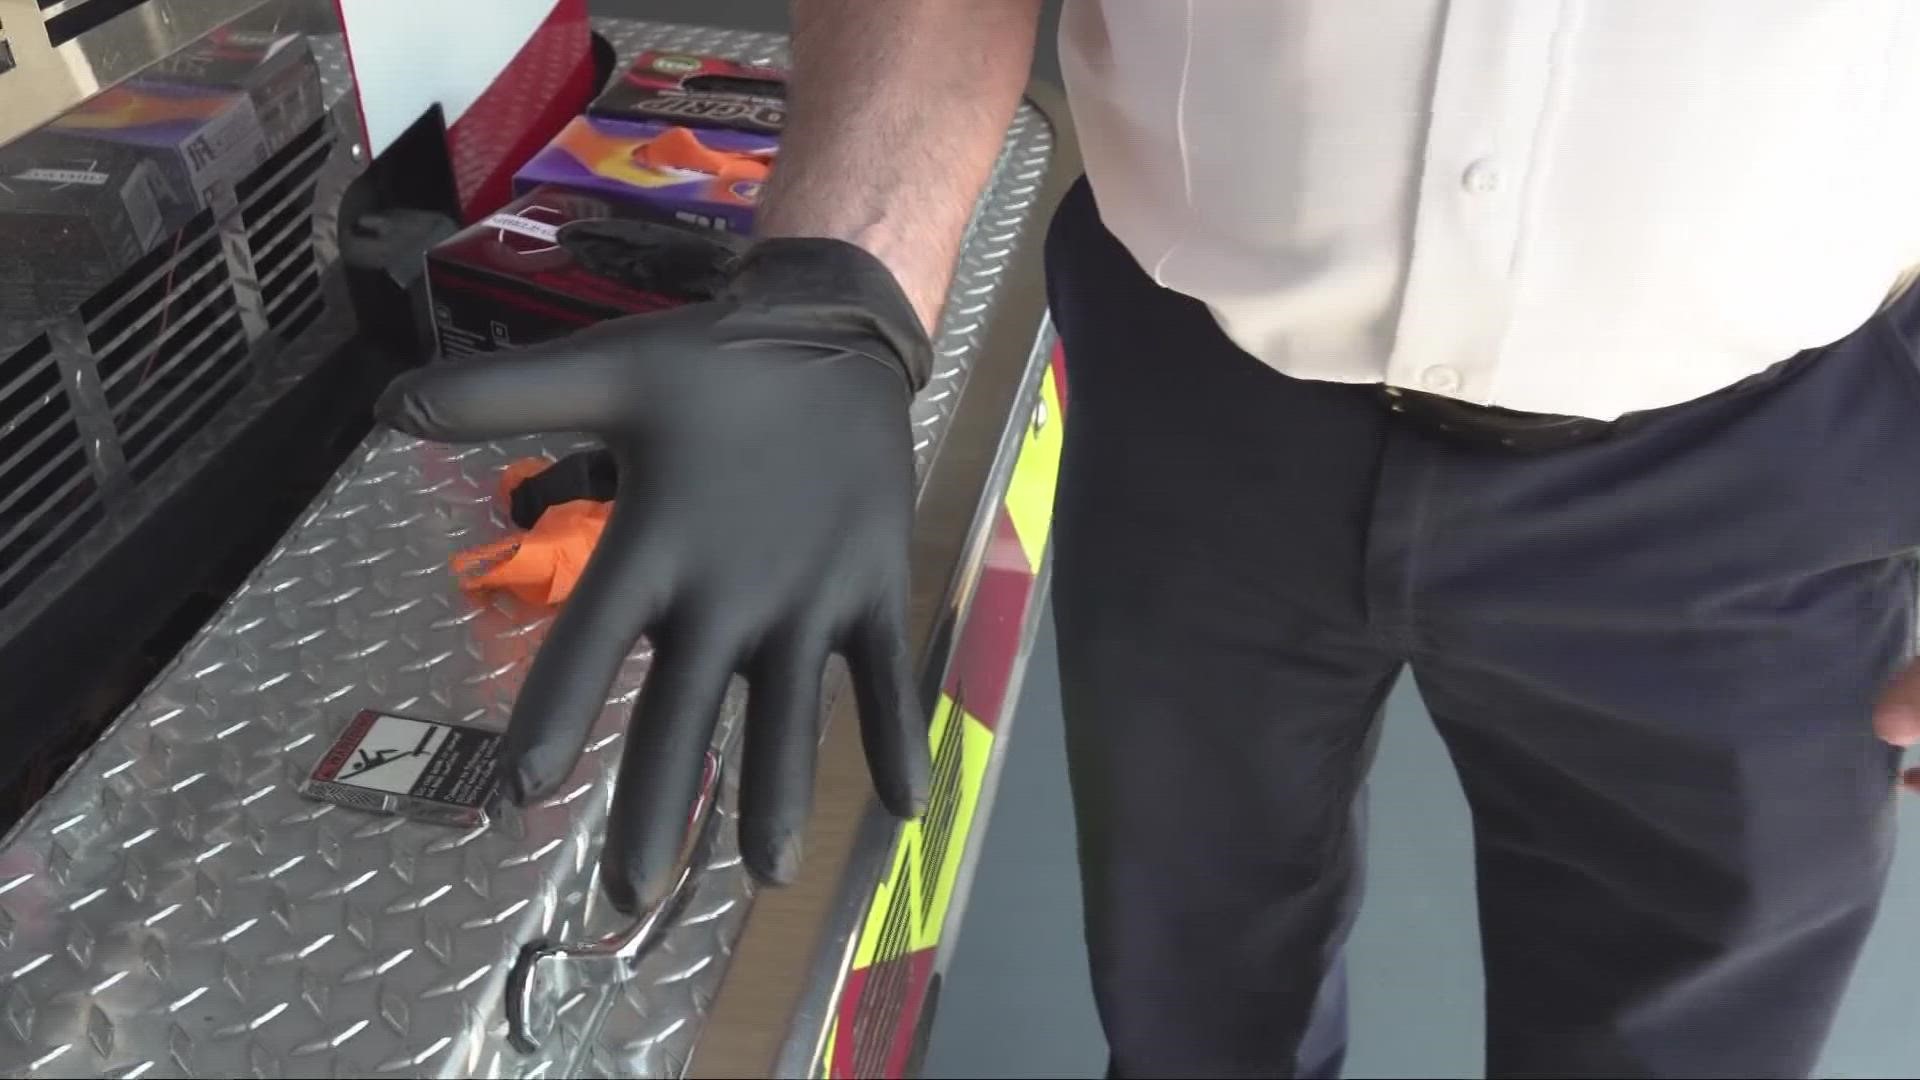 PH&S Products has created the first ever FDA-approved gloves for first responders that is designed to protect them from fentanyl.